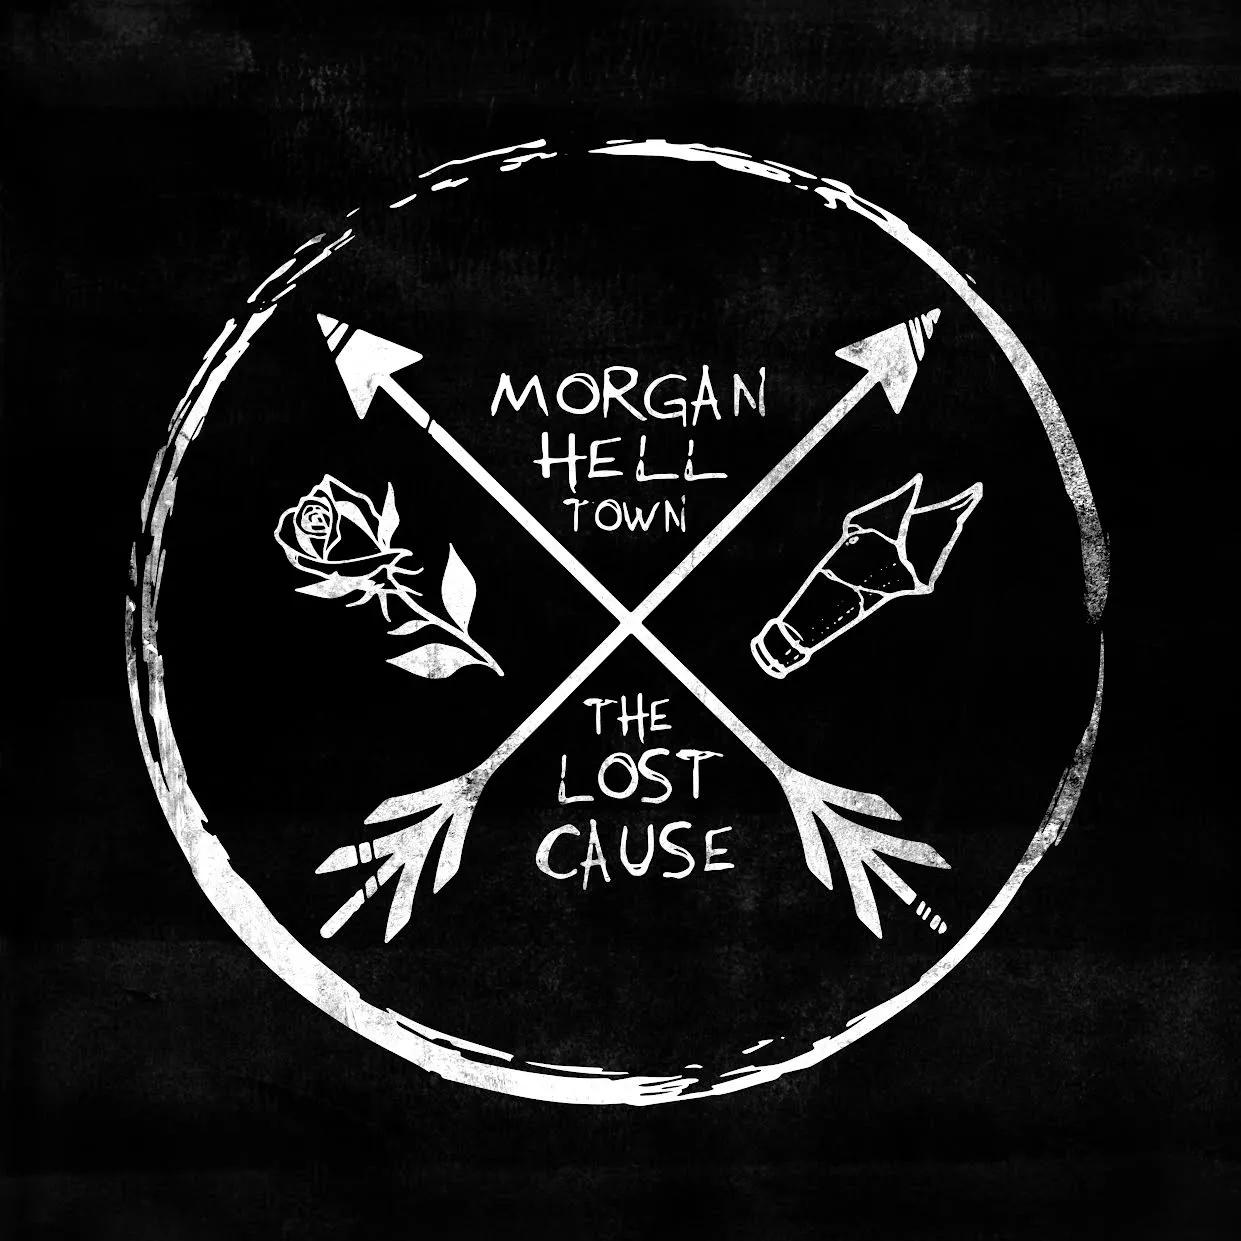 Morgan Helltown & The Lost Cause  - Morgan Helltown & The Lost Cause 